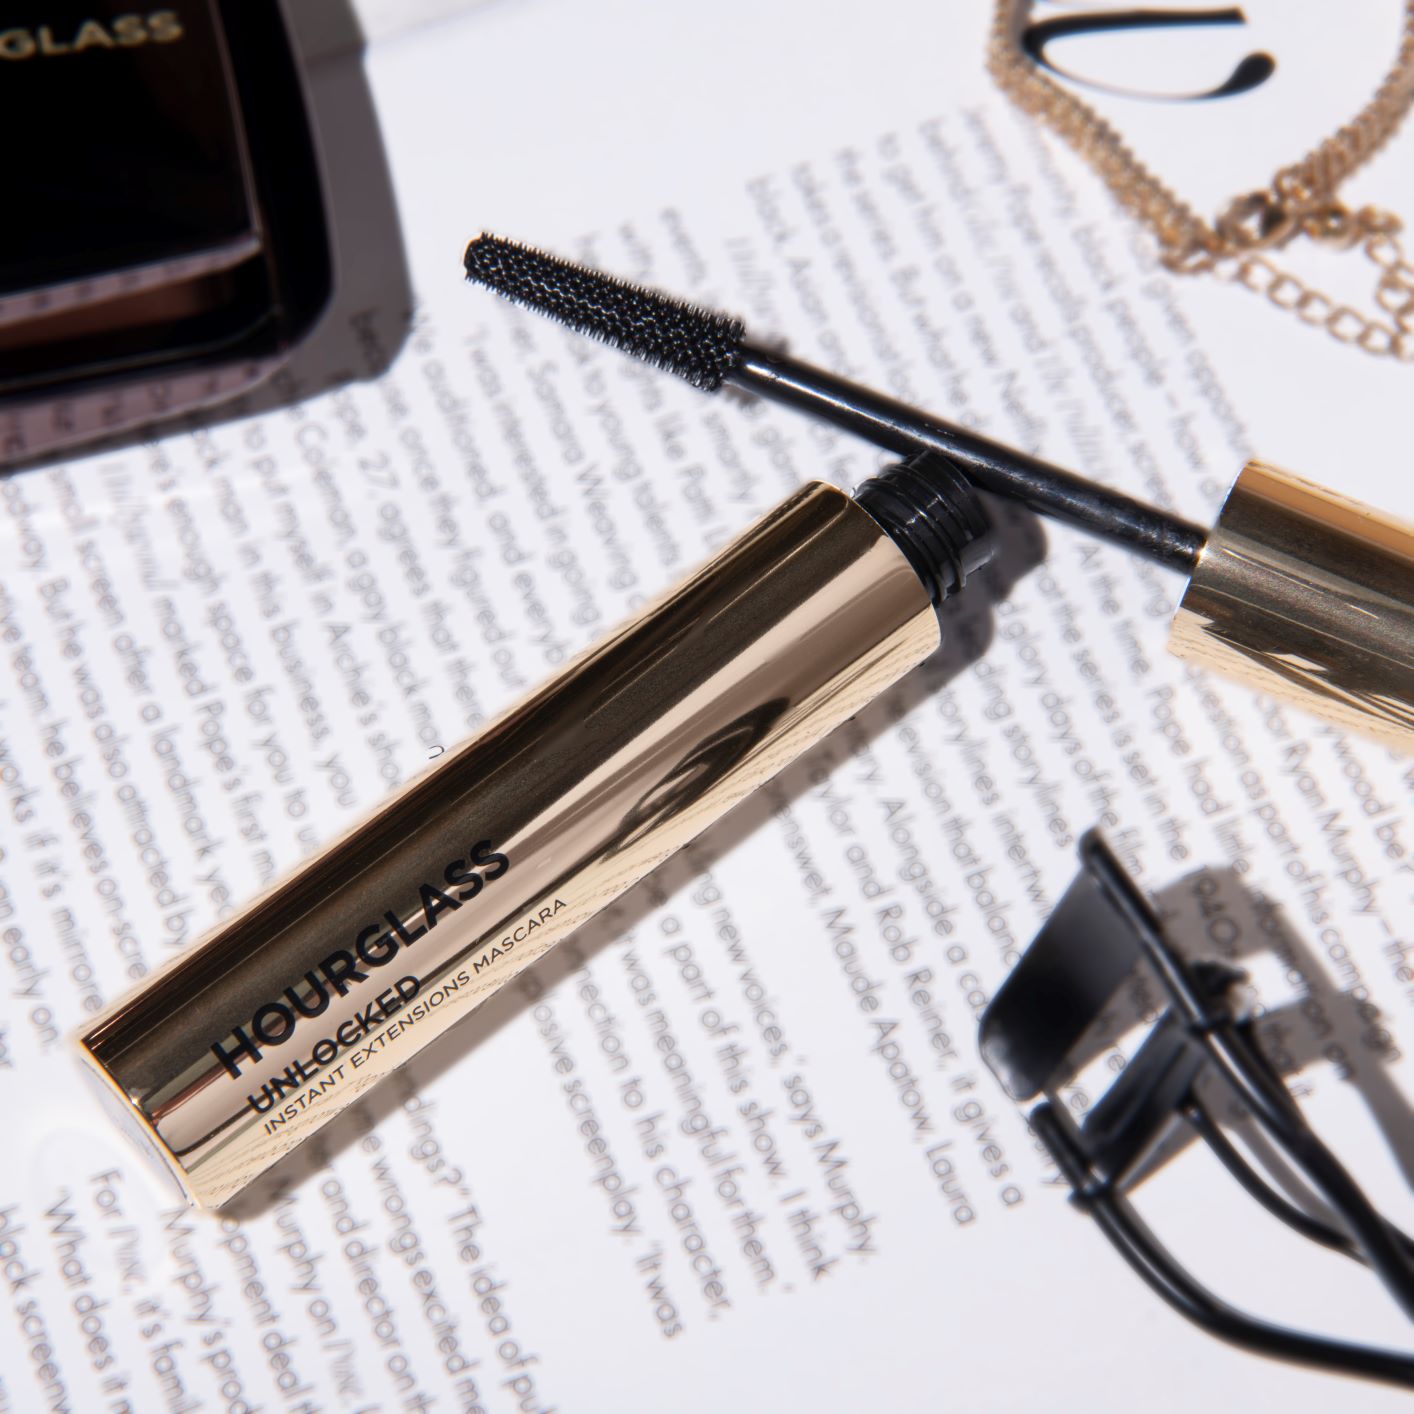 Why Our Editor Loves This Vegan, Cruelty-Free Mascara